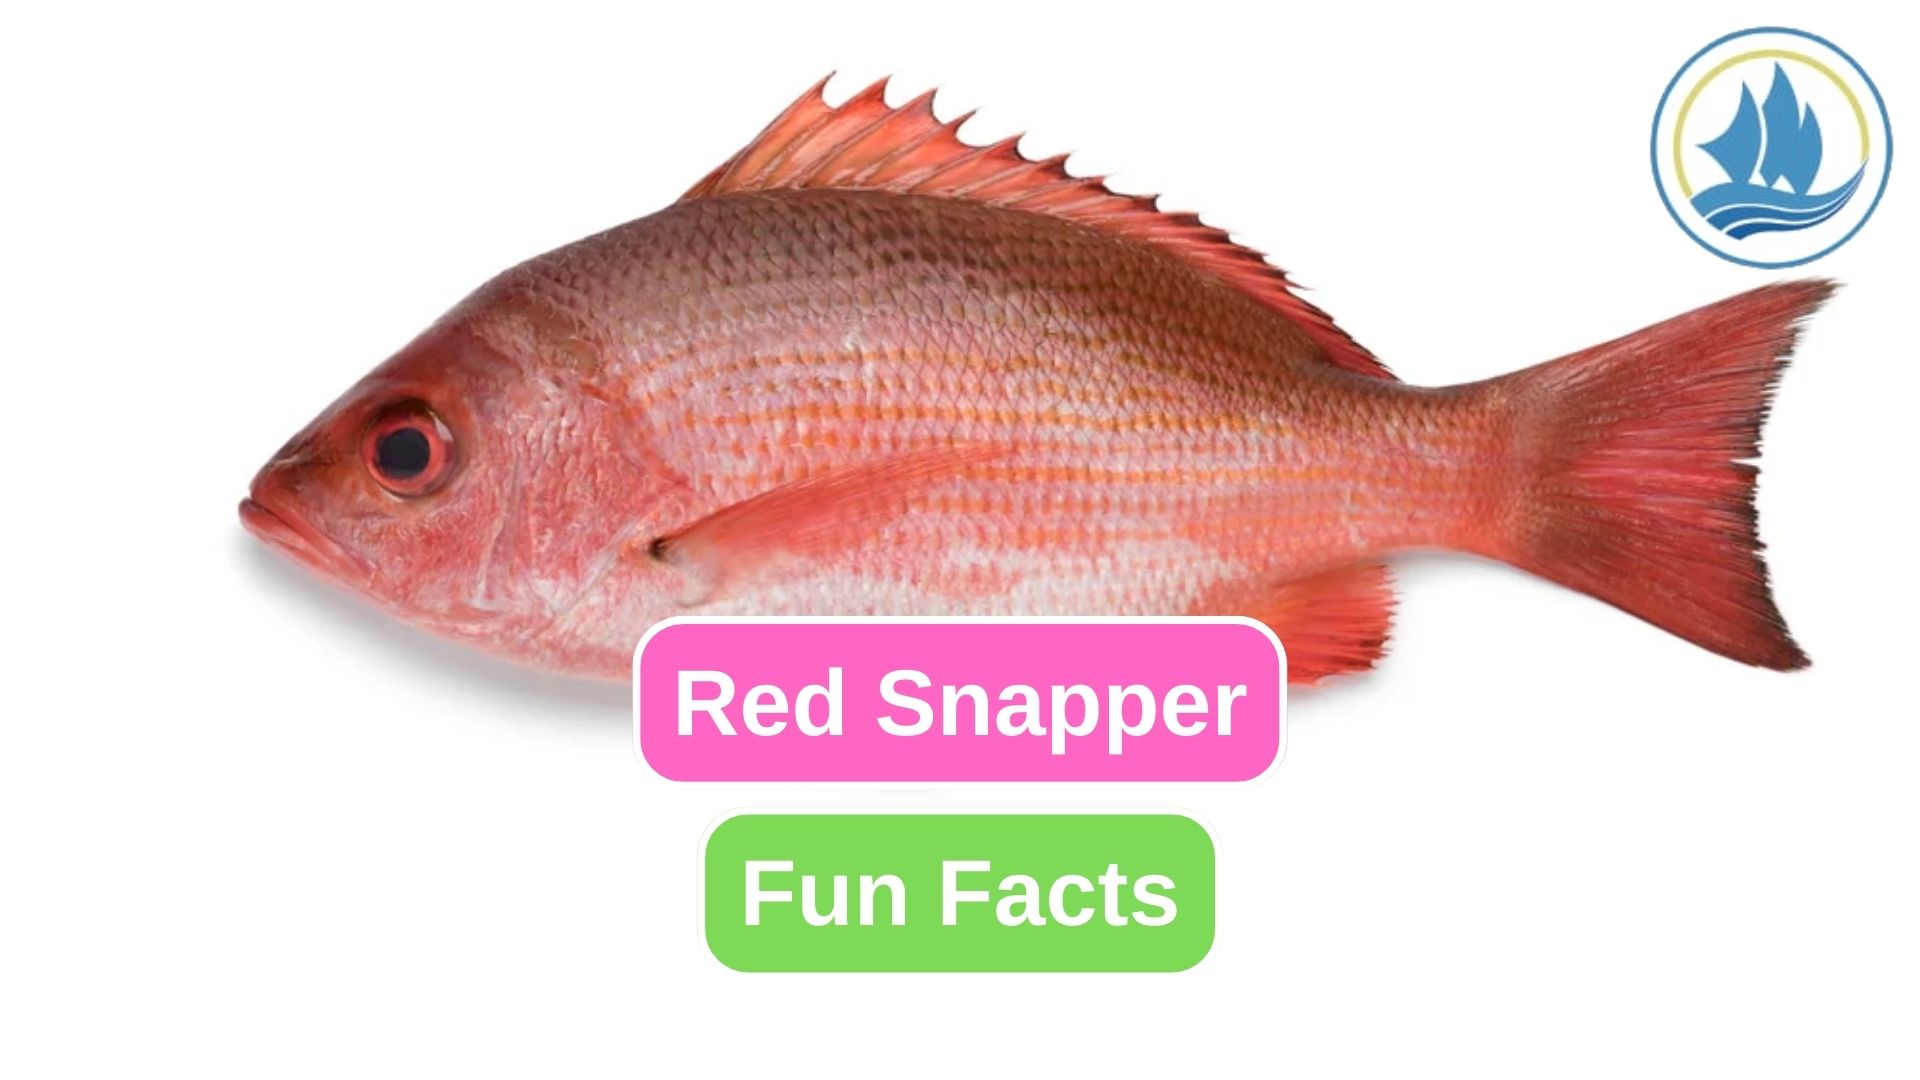 Here are 10 Fun Facts of Red Snapper